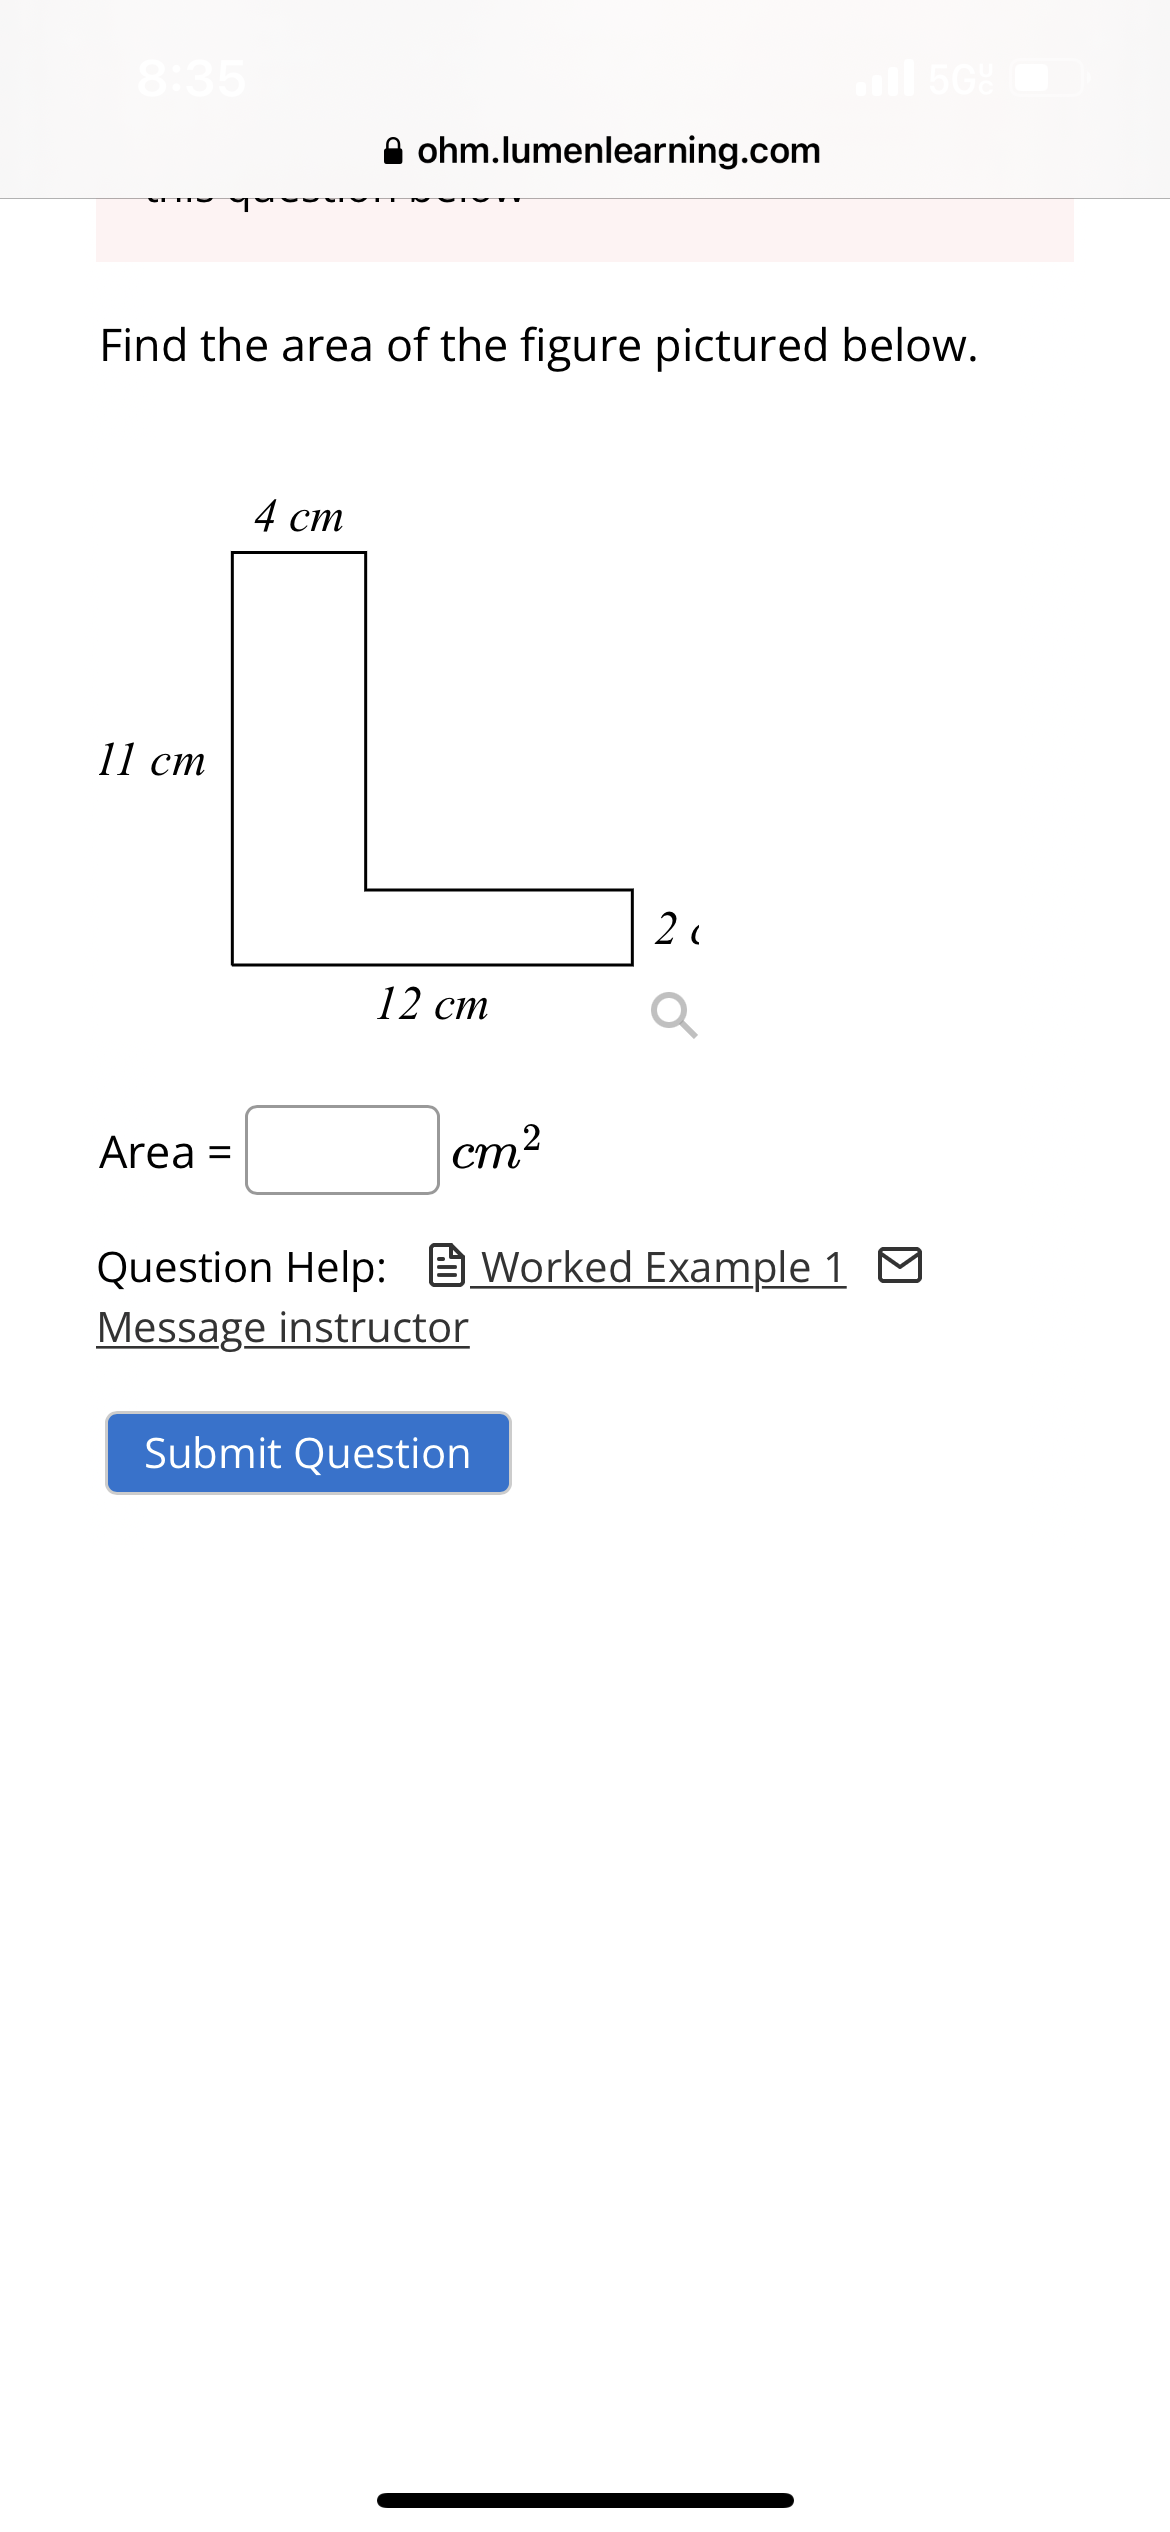 8:35
11 cm
Find the area of the figure pictured below.
Area
ohm.lumenlearning.com
4 cm
=
12 cm
cm²
Question Help: Worked Example 1
Message instructor
2(
Submit Question
il 50%